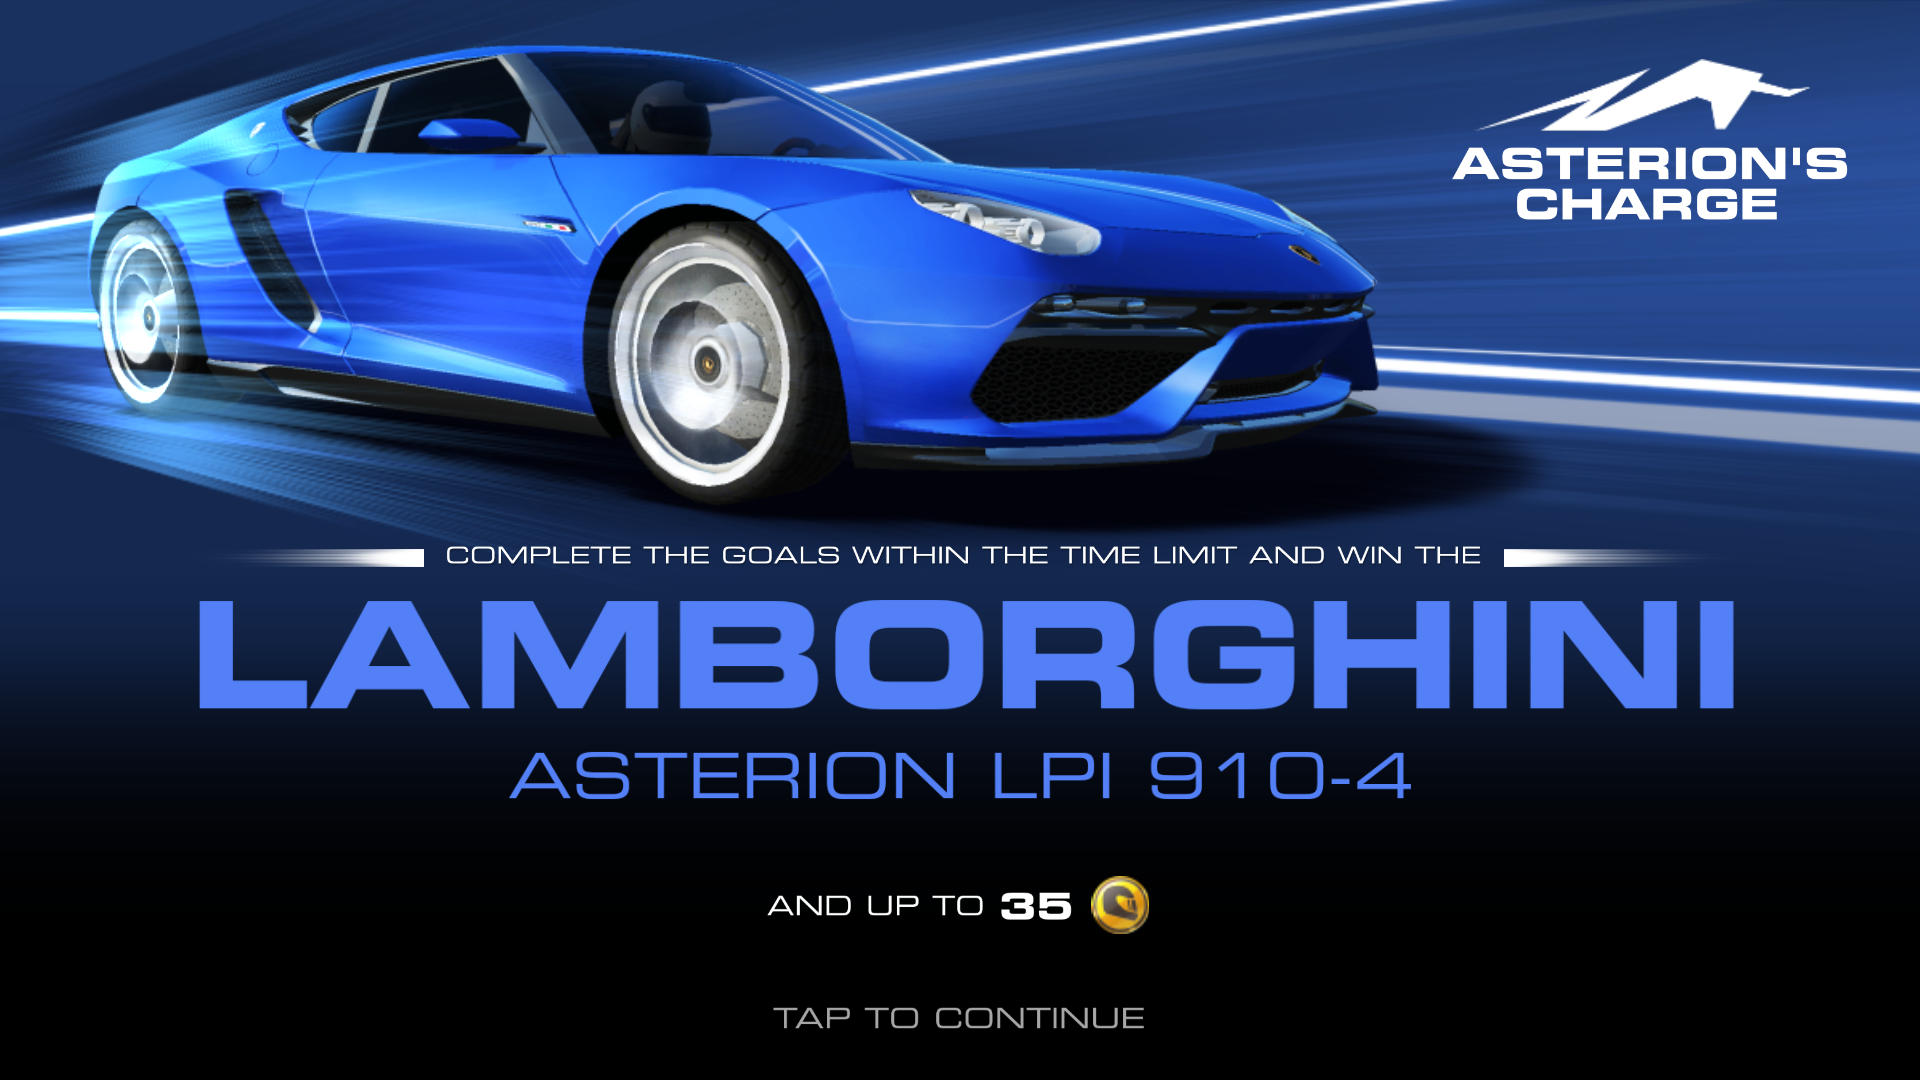 Asterion's Charge () | Real Racing 3 Wiki | Fandom